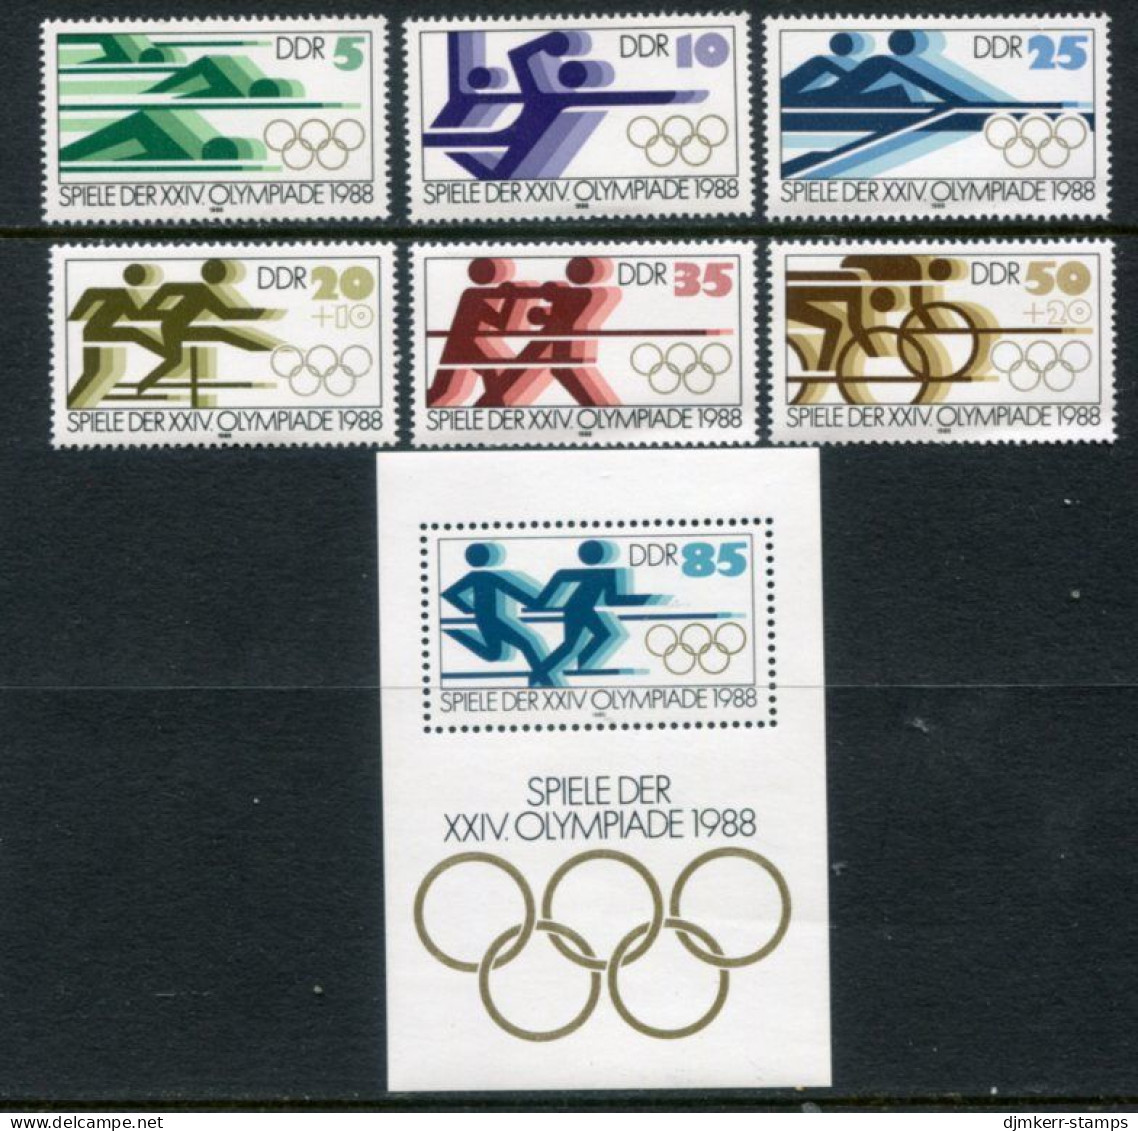 EAST GERMANY / DDR 1988 Olympic Games Set + Block  MNH / ** .  Michel 3183-88, Block 94 - Unused Stamps